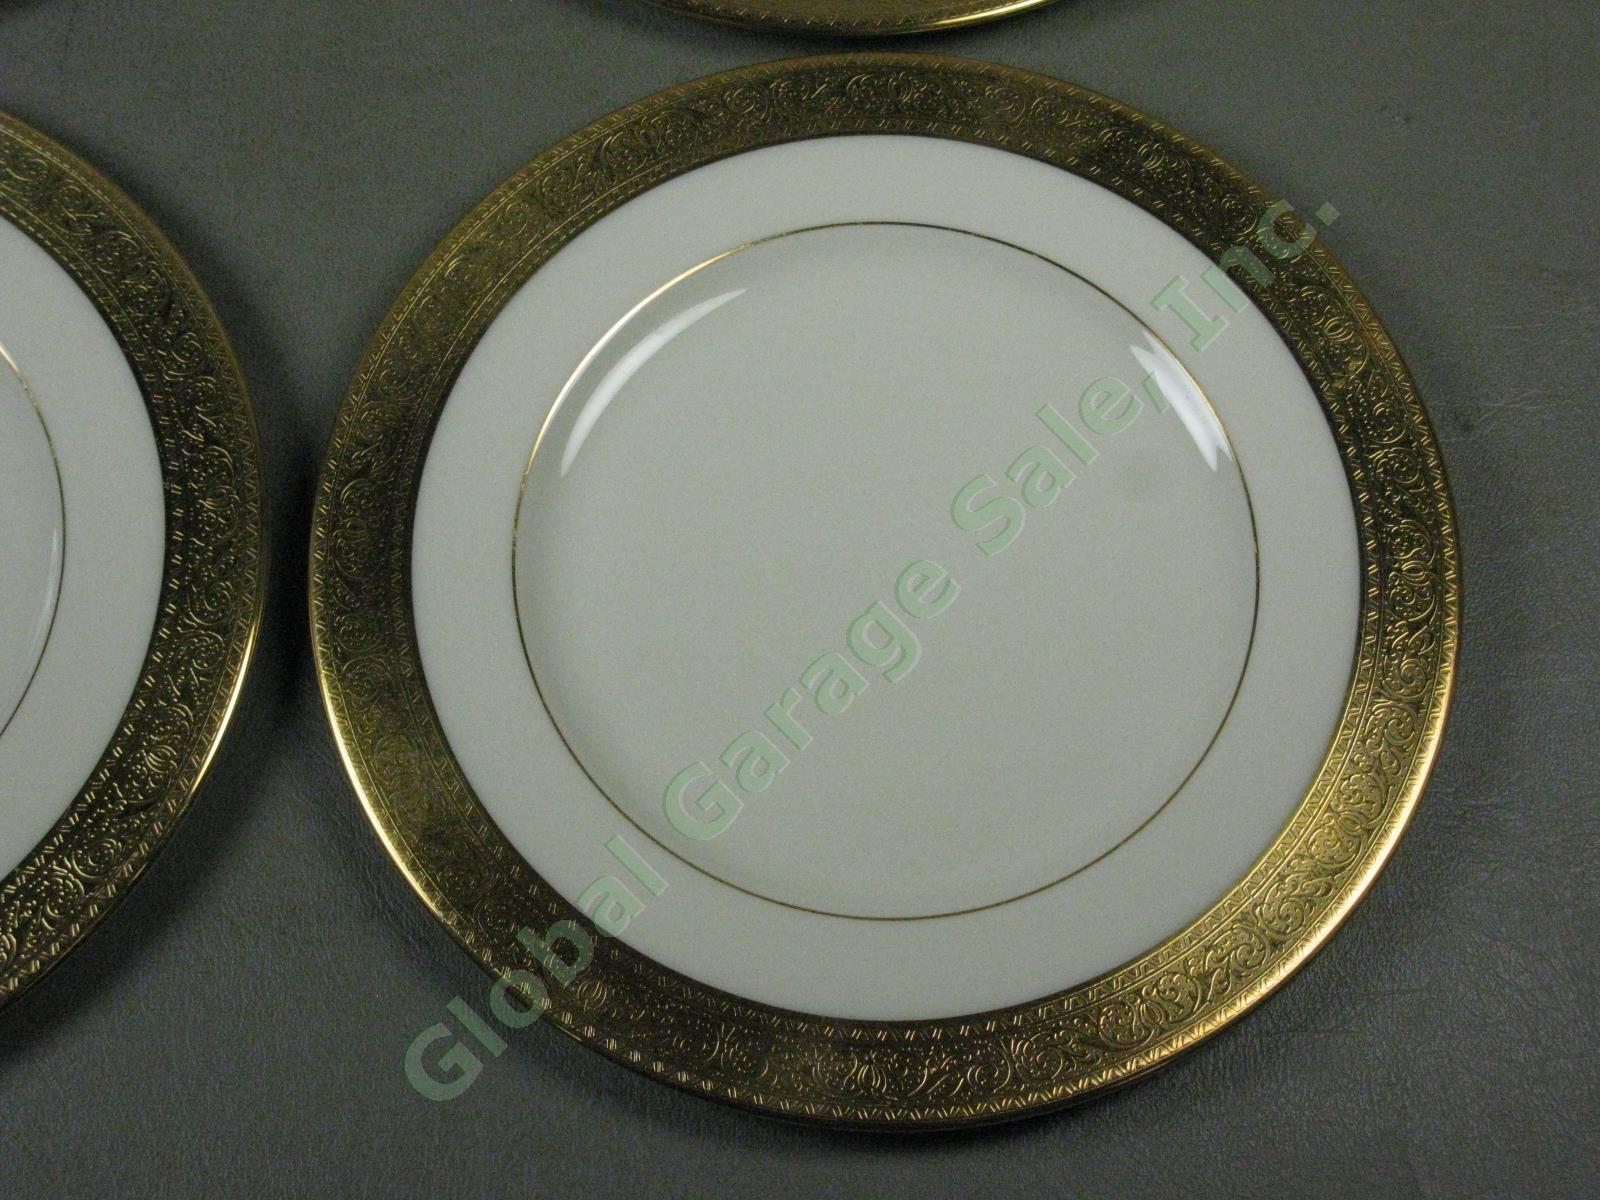 4 Lenox Westchester China M139 Presidential Gold Encrusted 8-3/8" Salad Plates 1